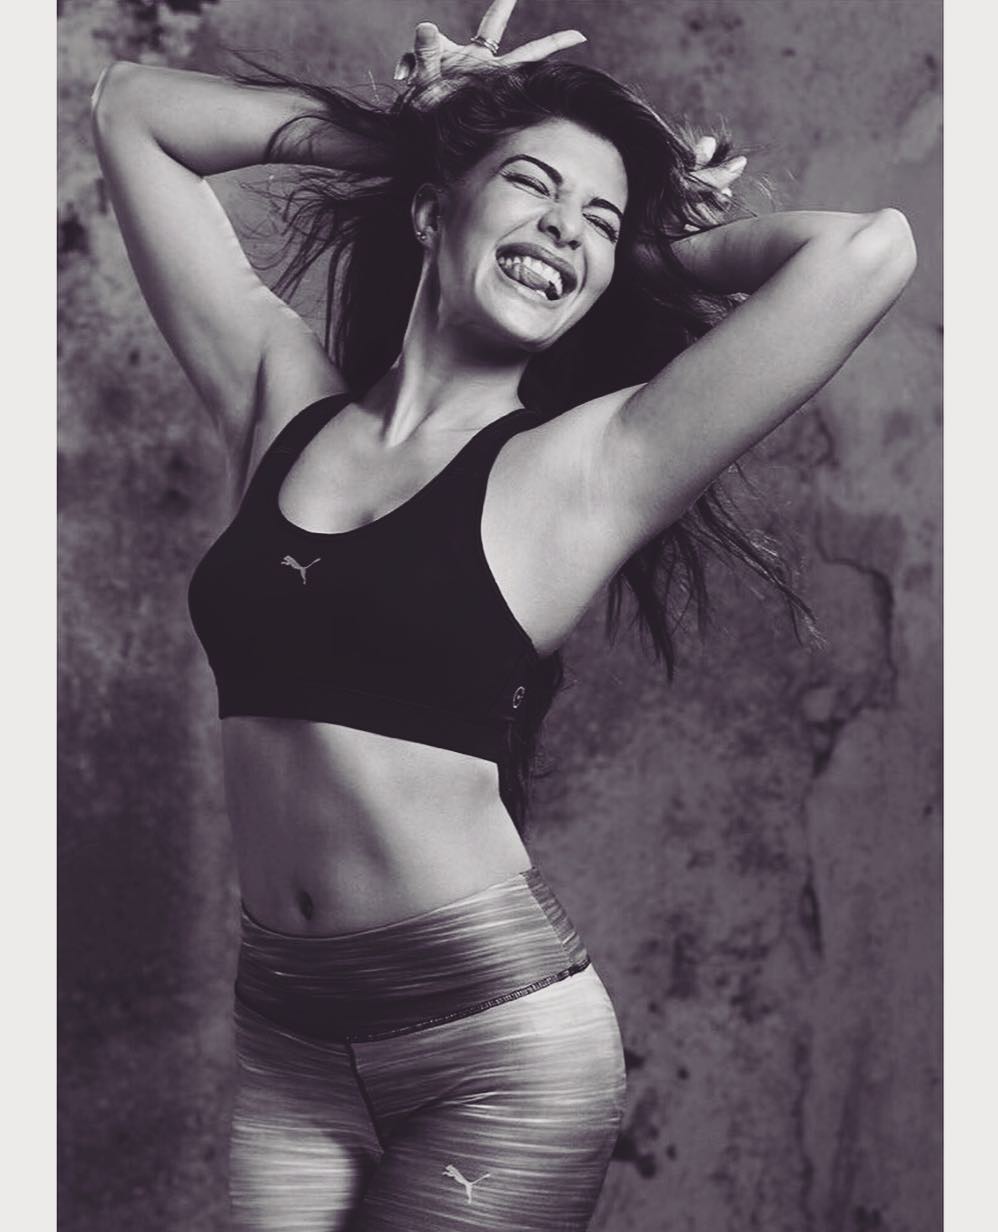 She loves to be fit #JacquelineShe loves to be fit #Jacqueline